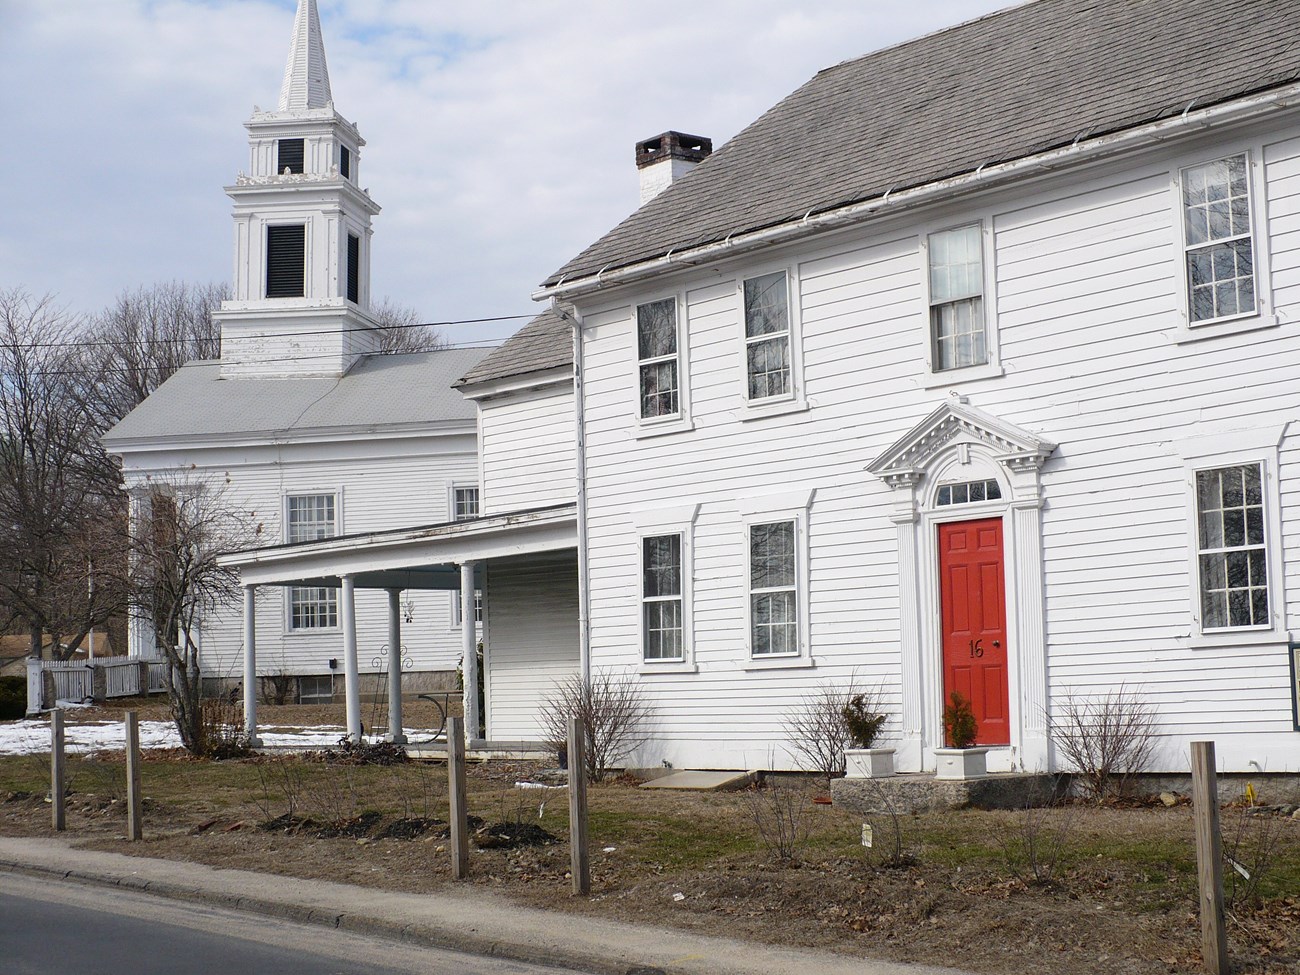 John Slater house, white house with Congregational Church in the background